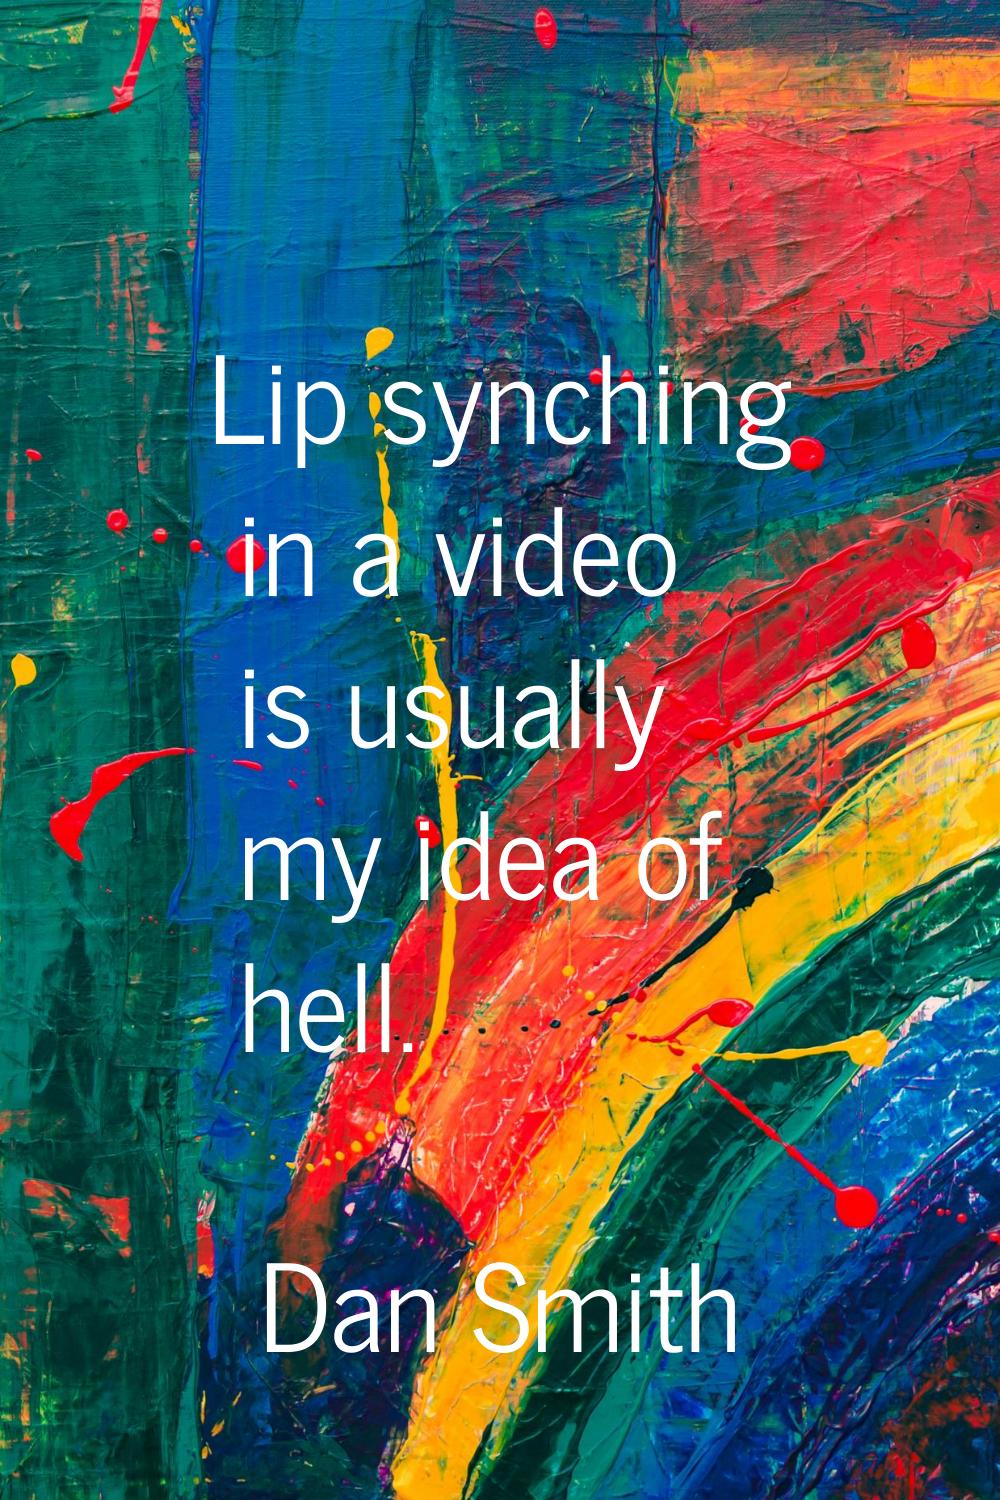 Lip synching in a video is usually my idea of hell.